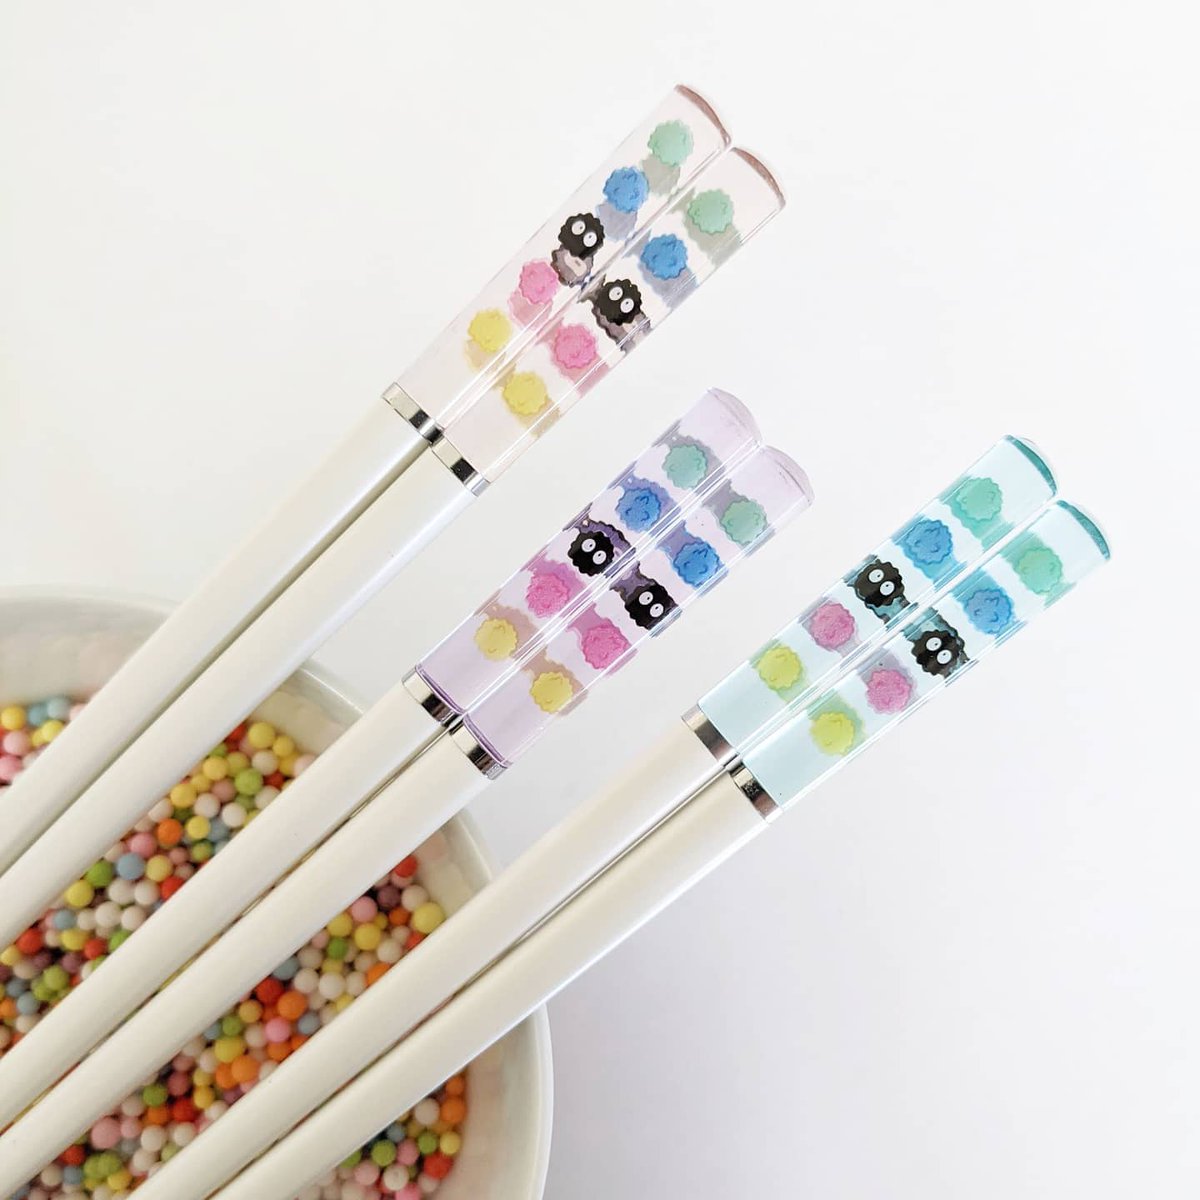 🥢CHOPSTICKIES🥢

These adorable chopsticks are as popular as they can be, and I don't have many left. I'm still debating on whether I'll be restocking these but for now, consider them discontinued! 

#kitchenutensils #chopsticks #ghibli